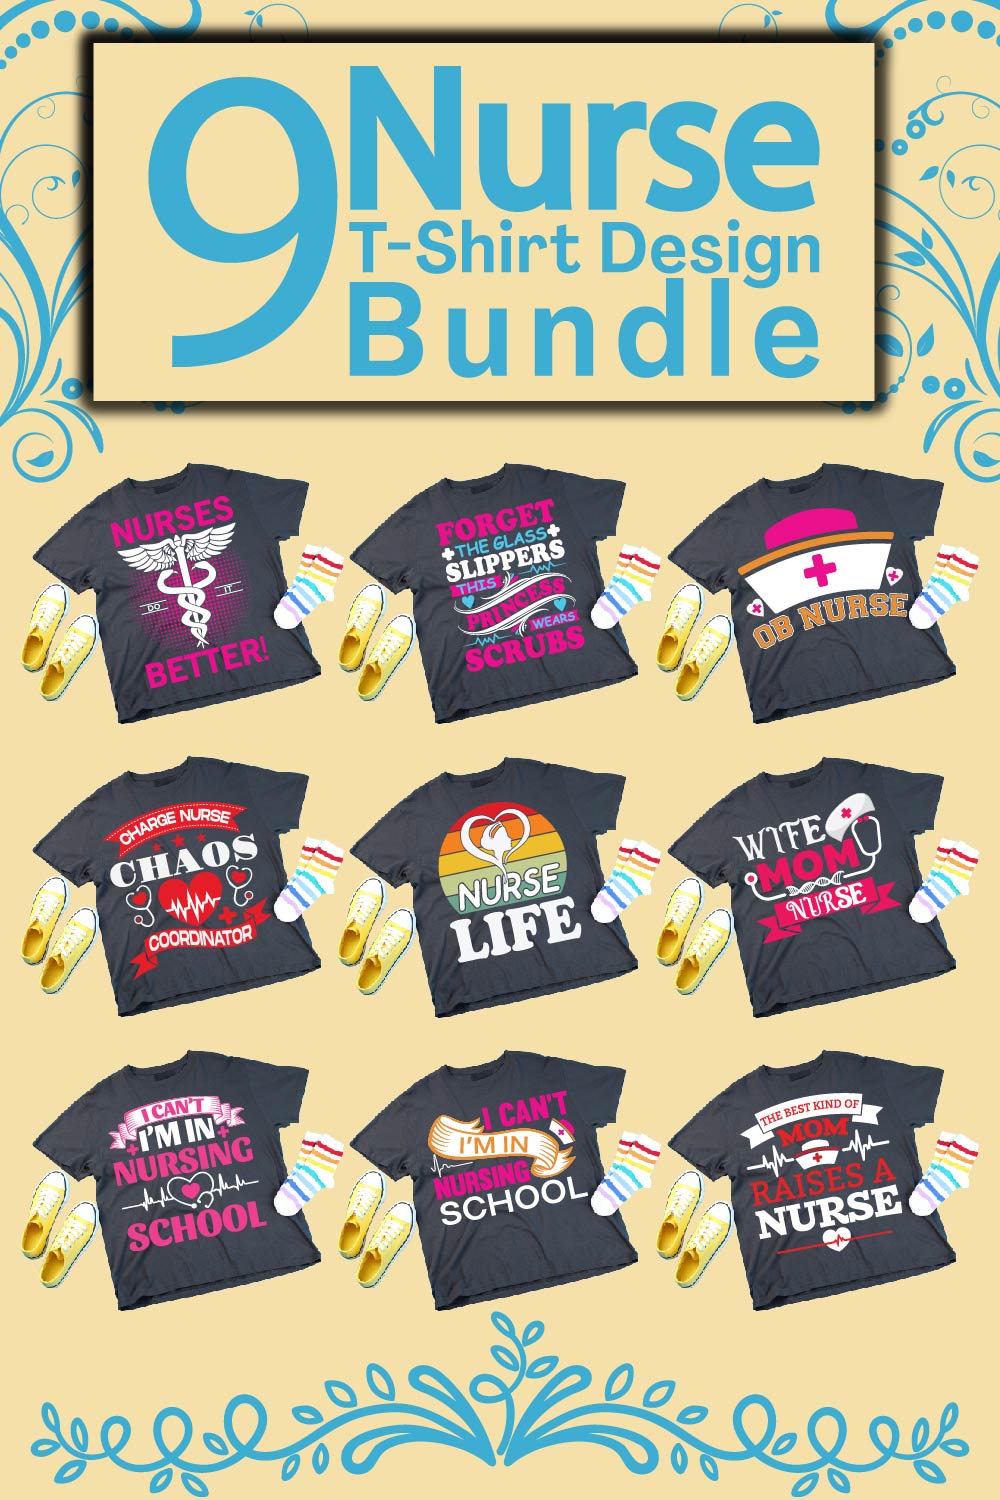 Bundle of images of t-shirts with enchanting print about nurses.